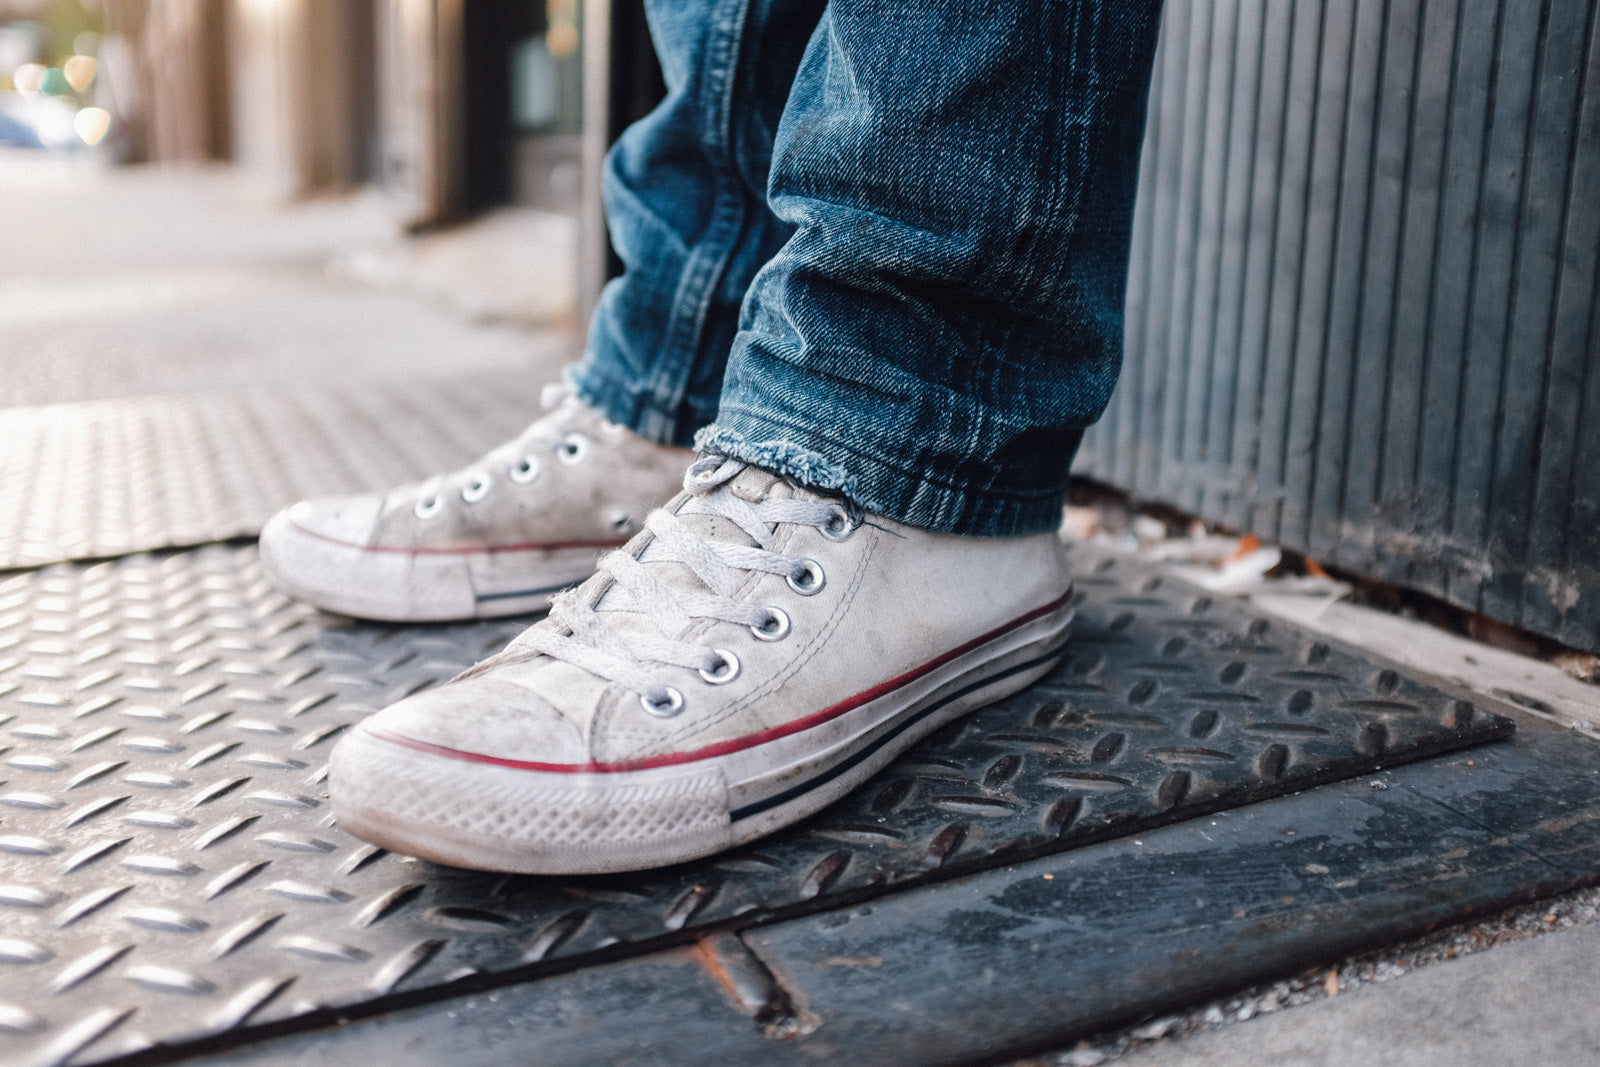 The jeans sit atop a pair of whit Converse sneakers.